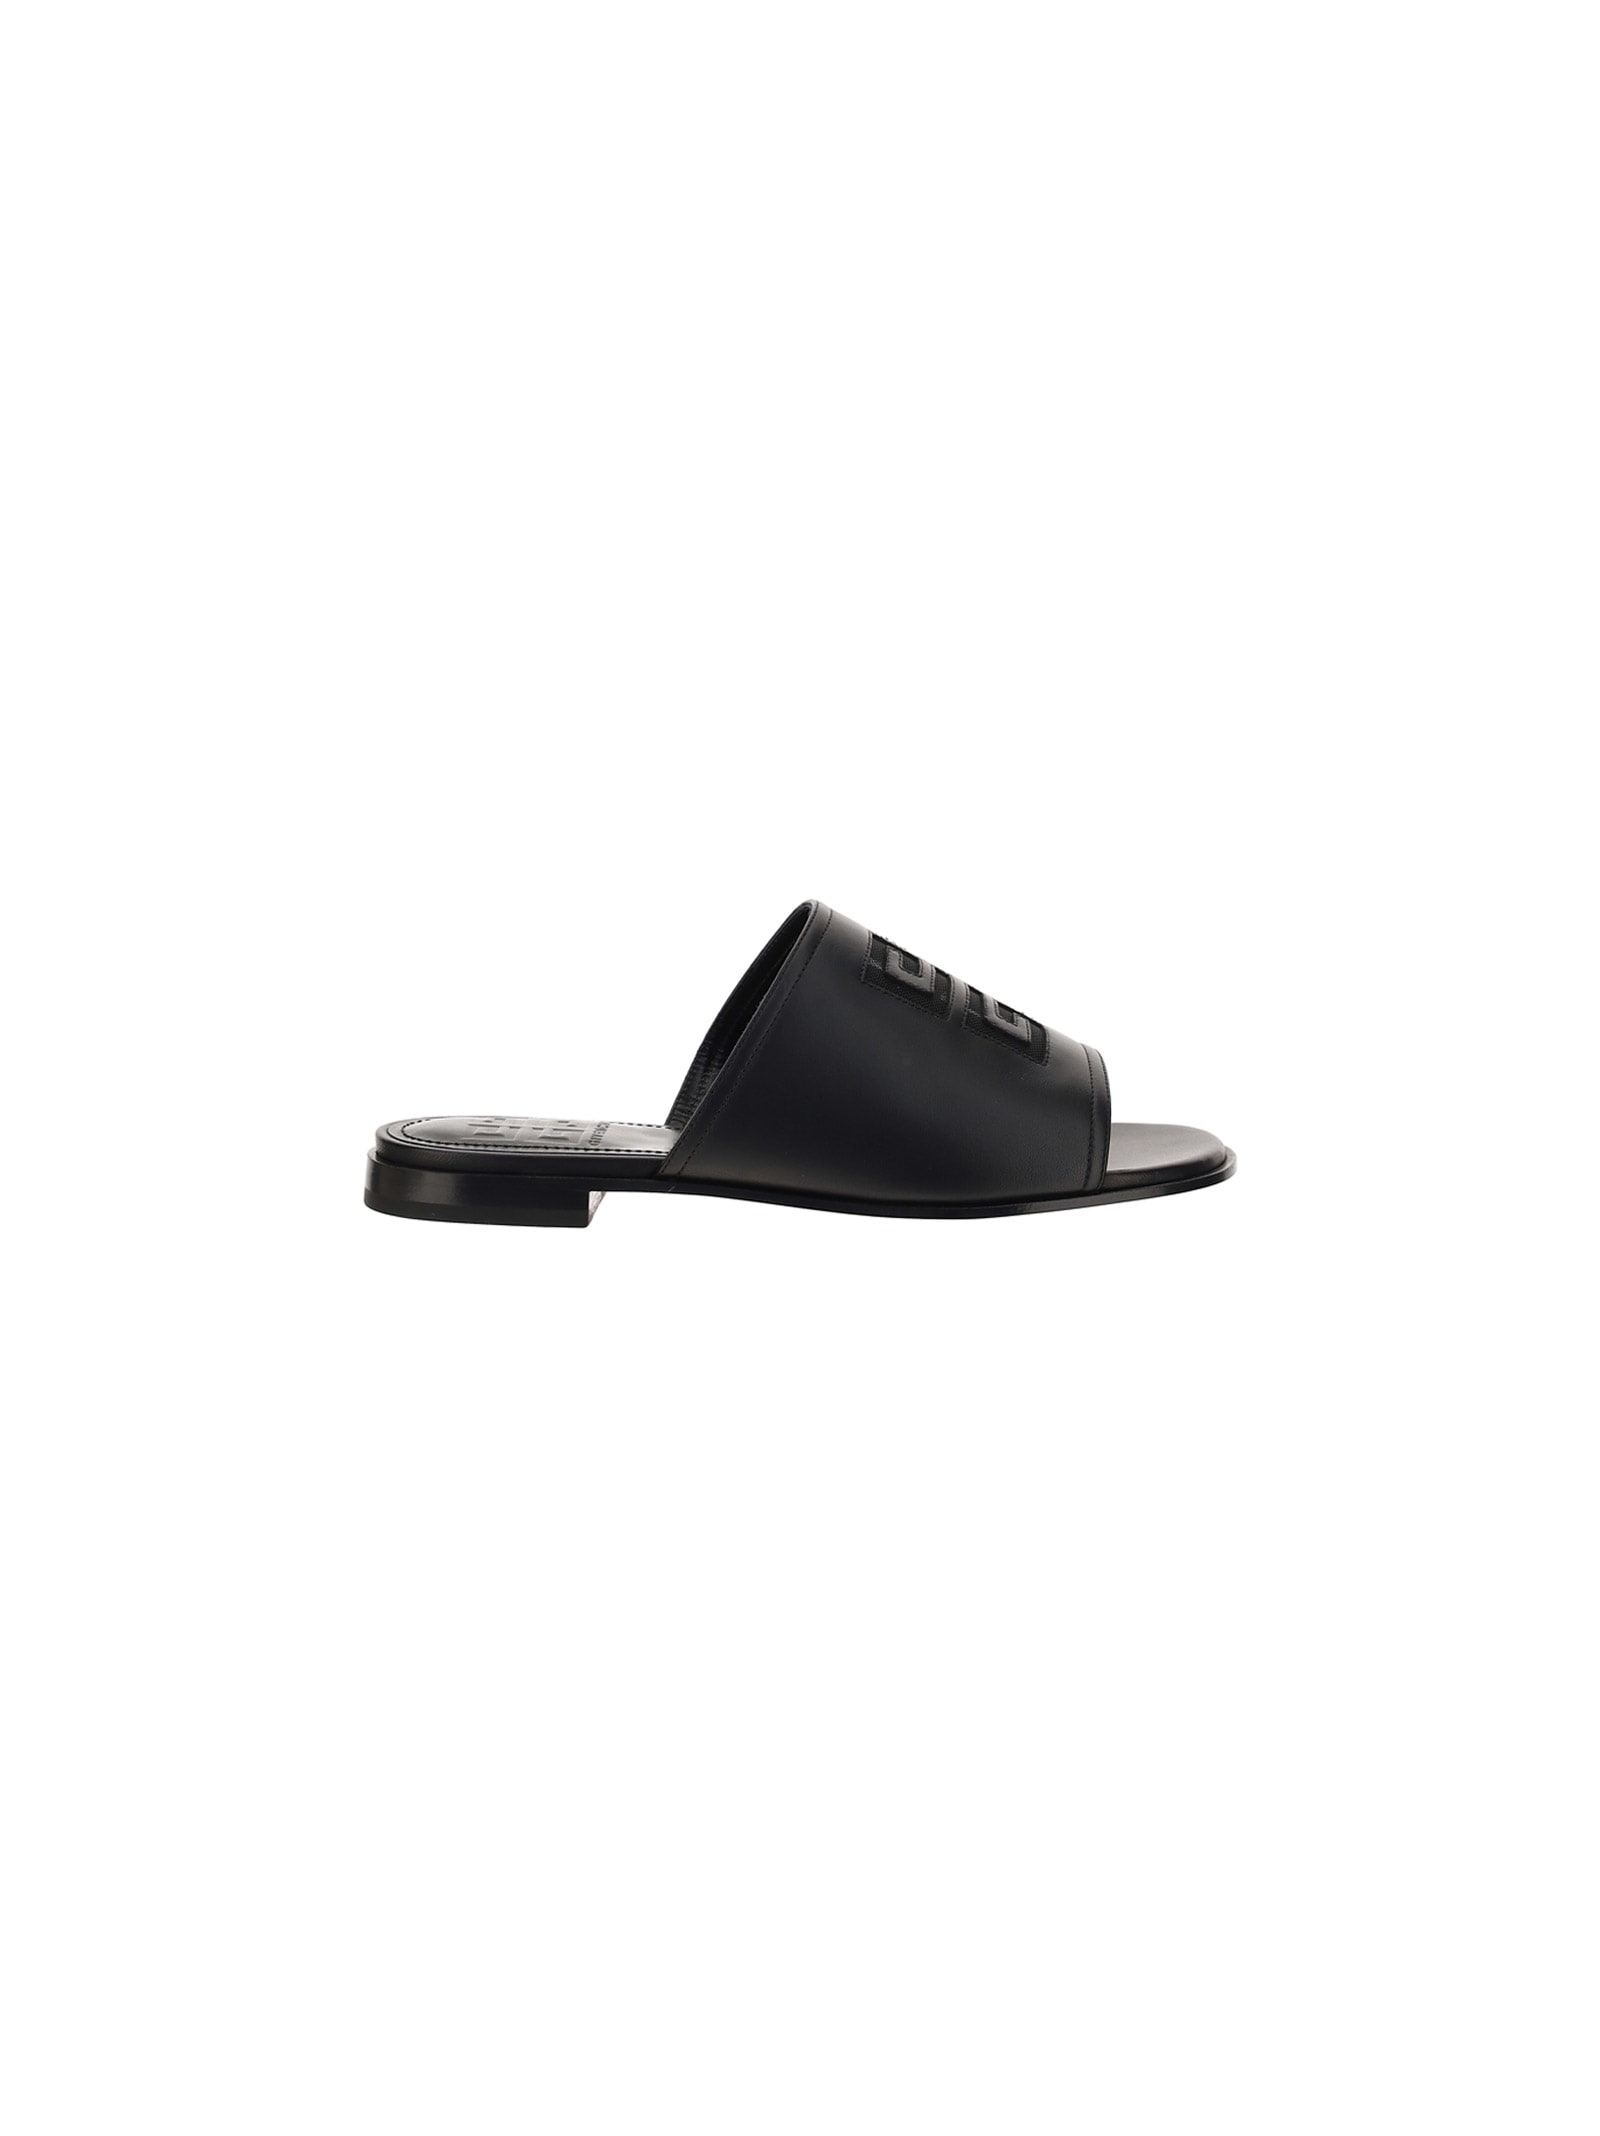 Givenchy 4g Flate Mule Sandal Shoes